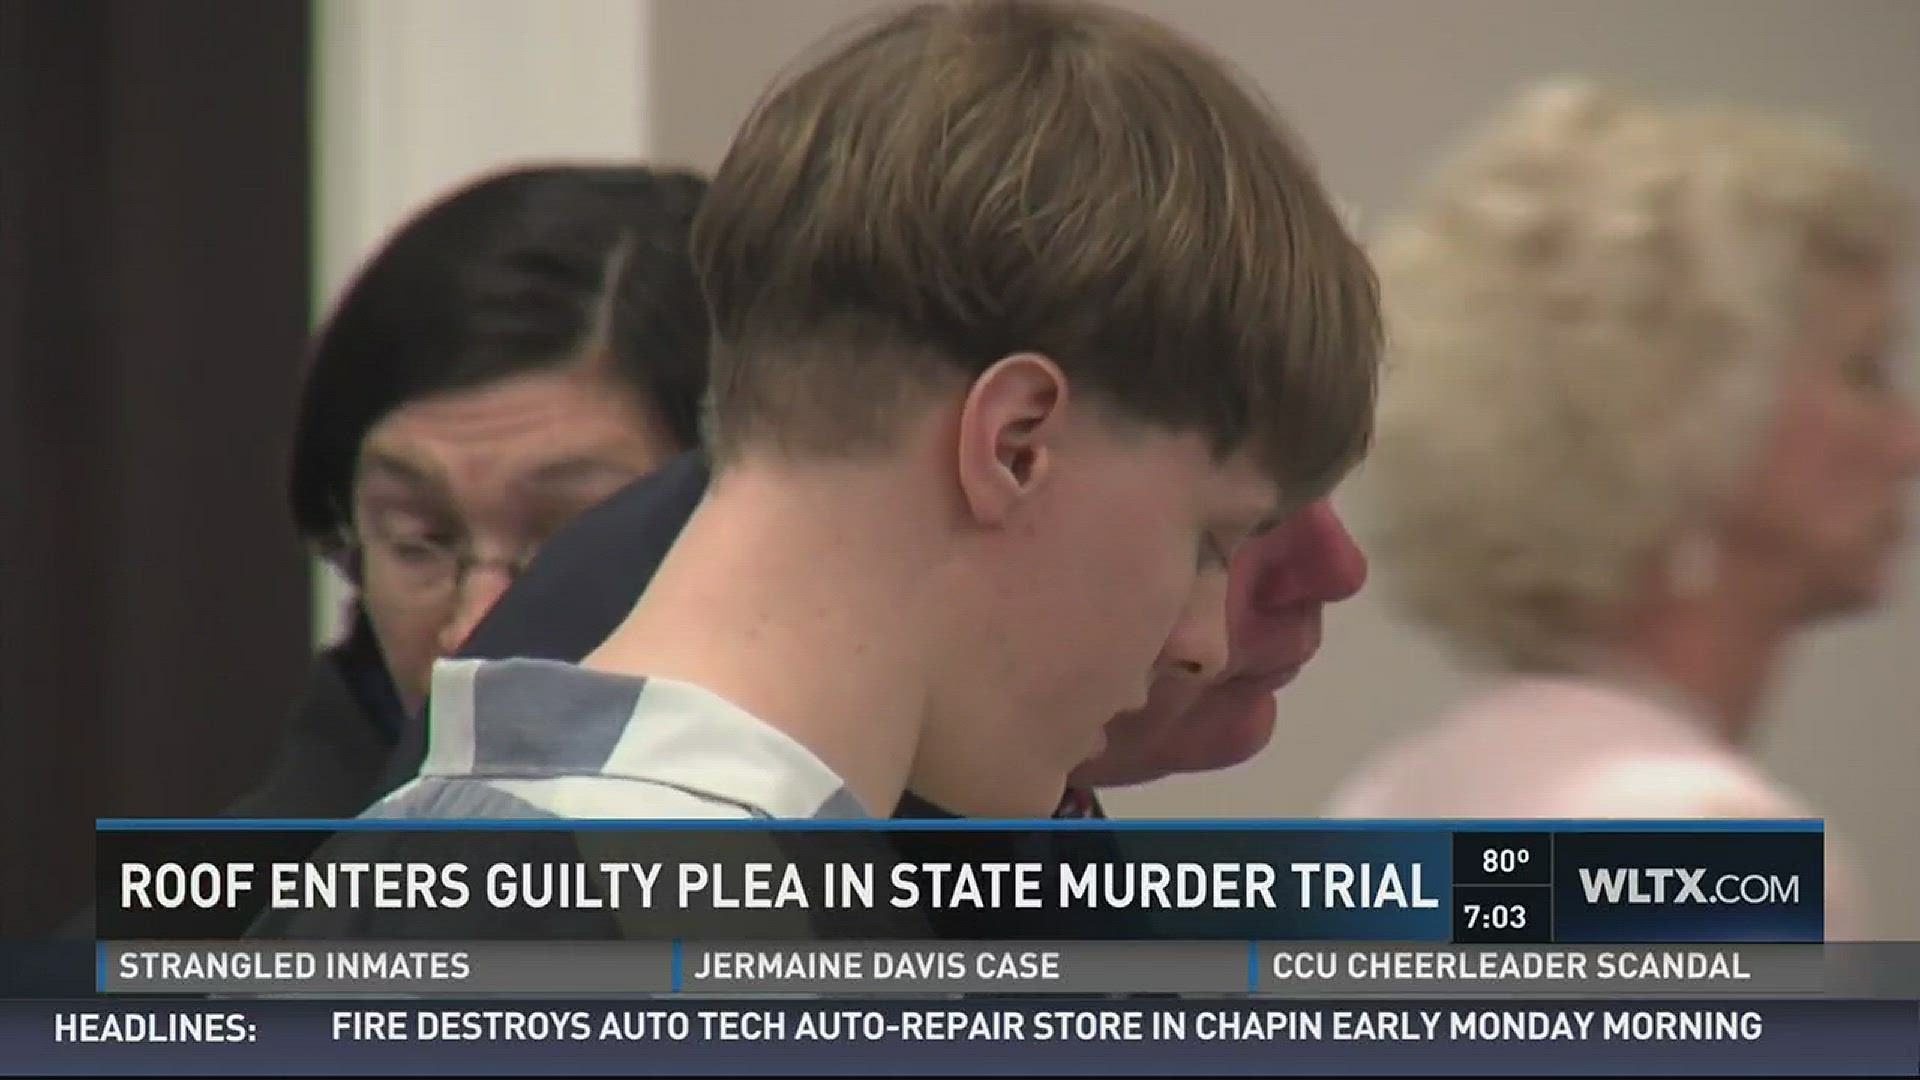 Dylann Roof gets 9 life sentences for the massacre of nine at a church in Charleston